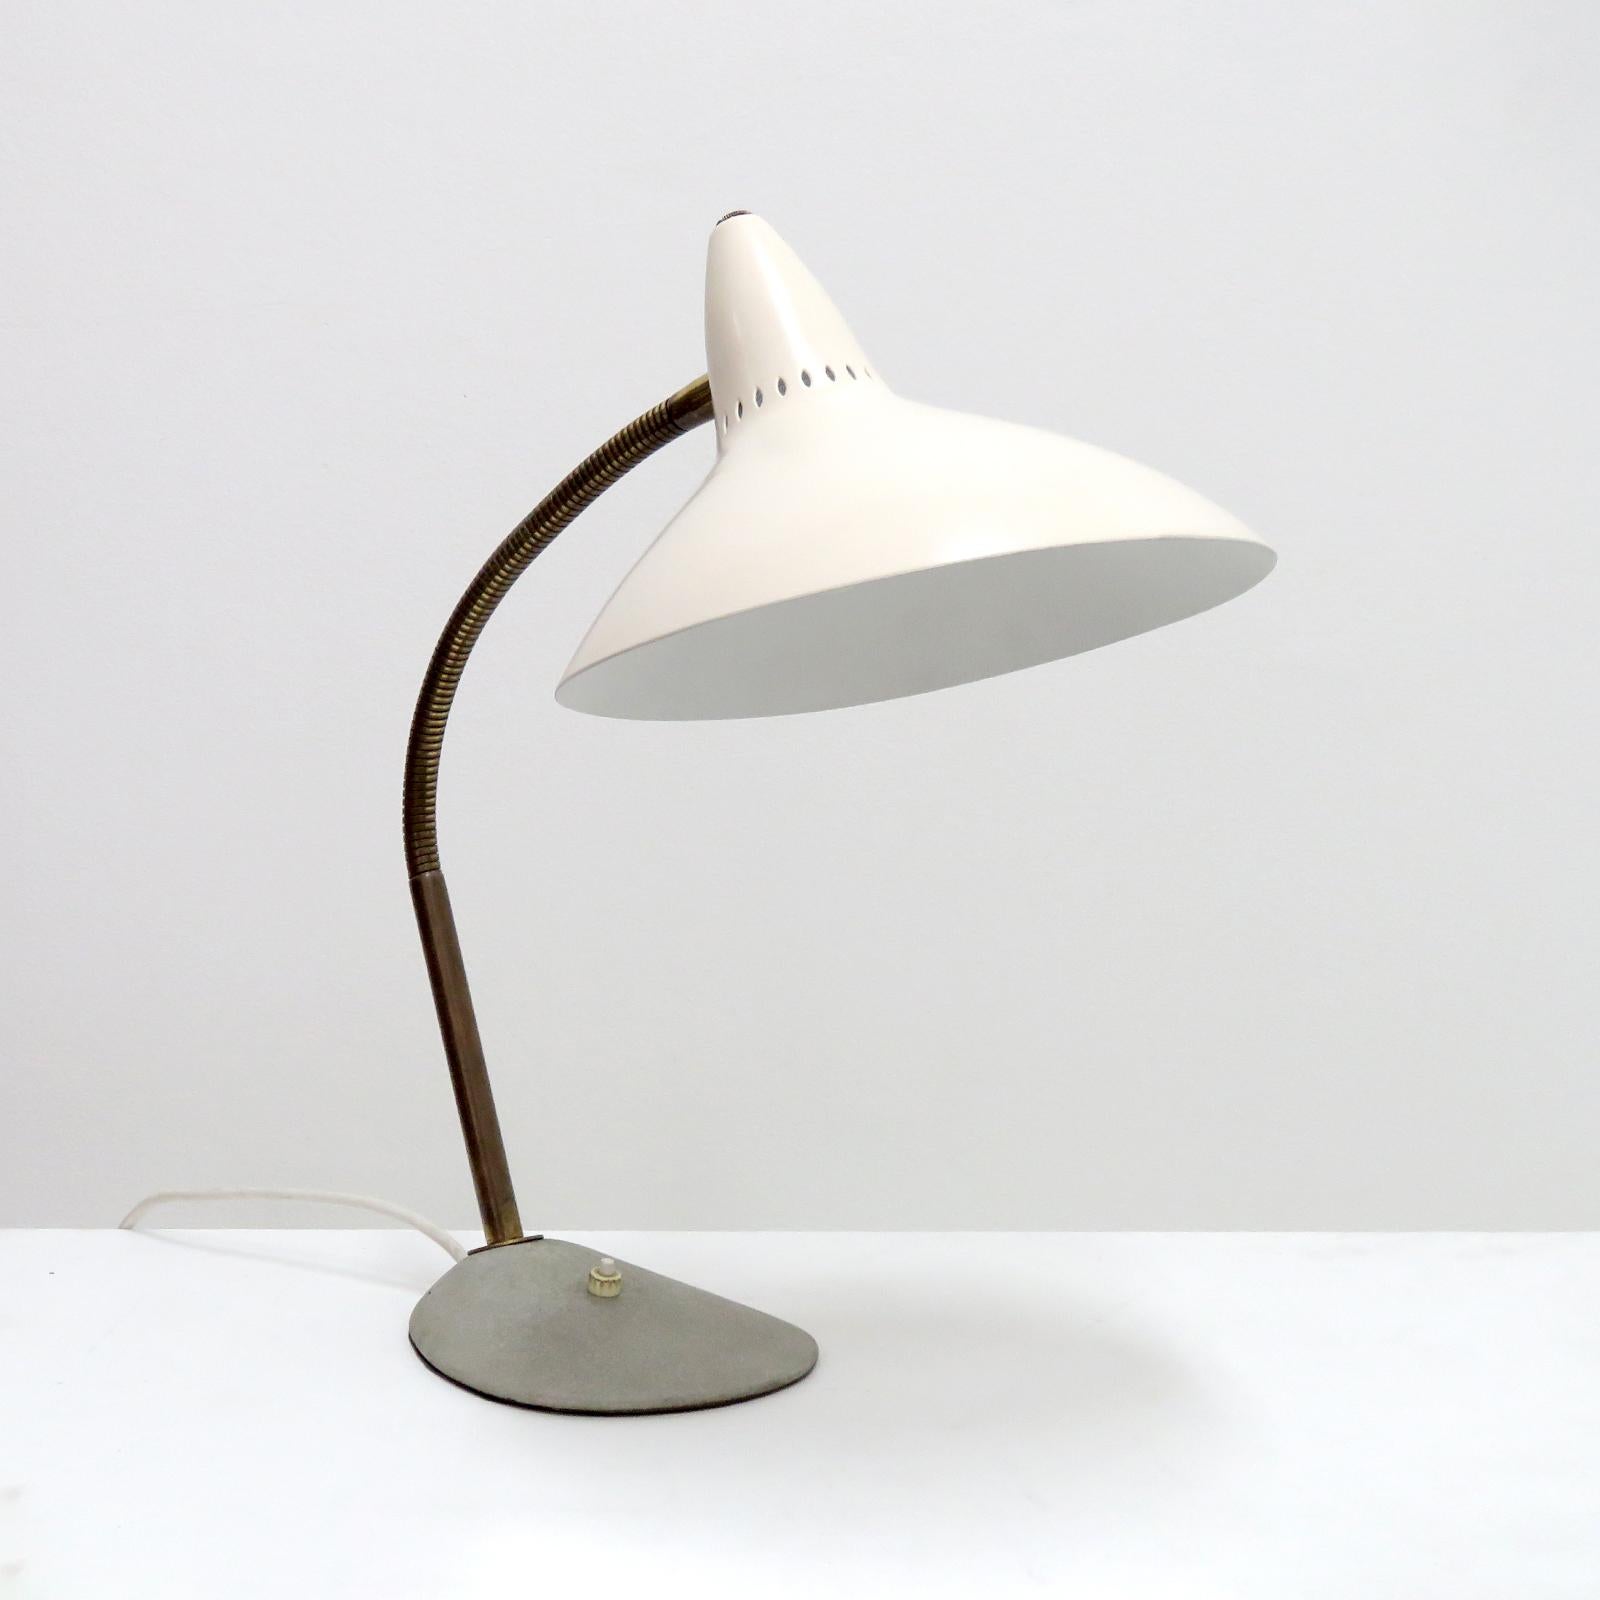 wonderful 1950's German table lamp with egg shell colored 'witches hat' shade on a flex brass arm and a grey base with individual on/off switch. Wired for US standards, one E26 socket, max. wattage 75w, bulb provided as a onetime courtesy.